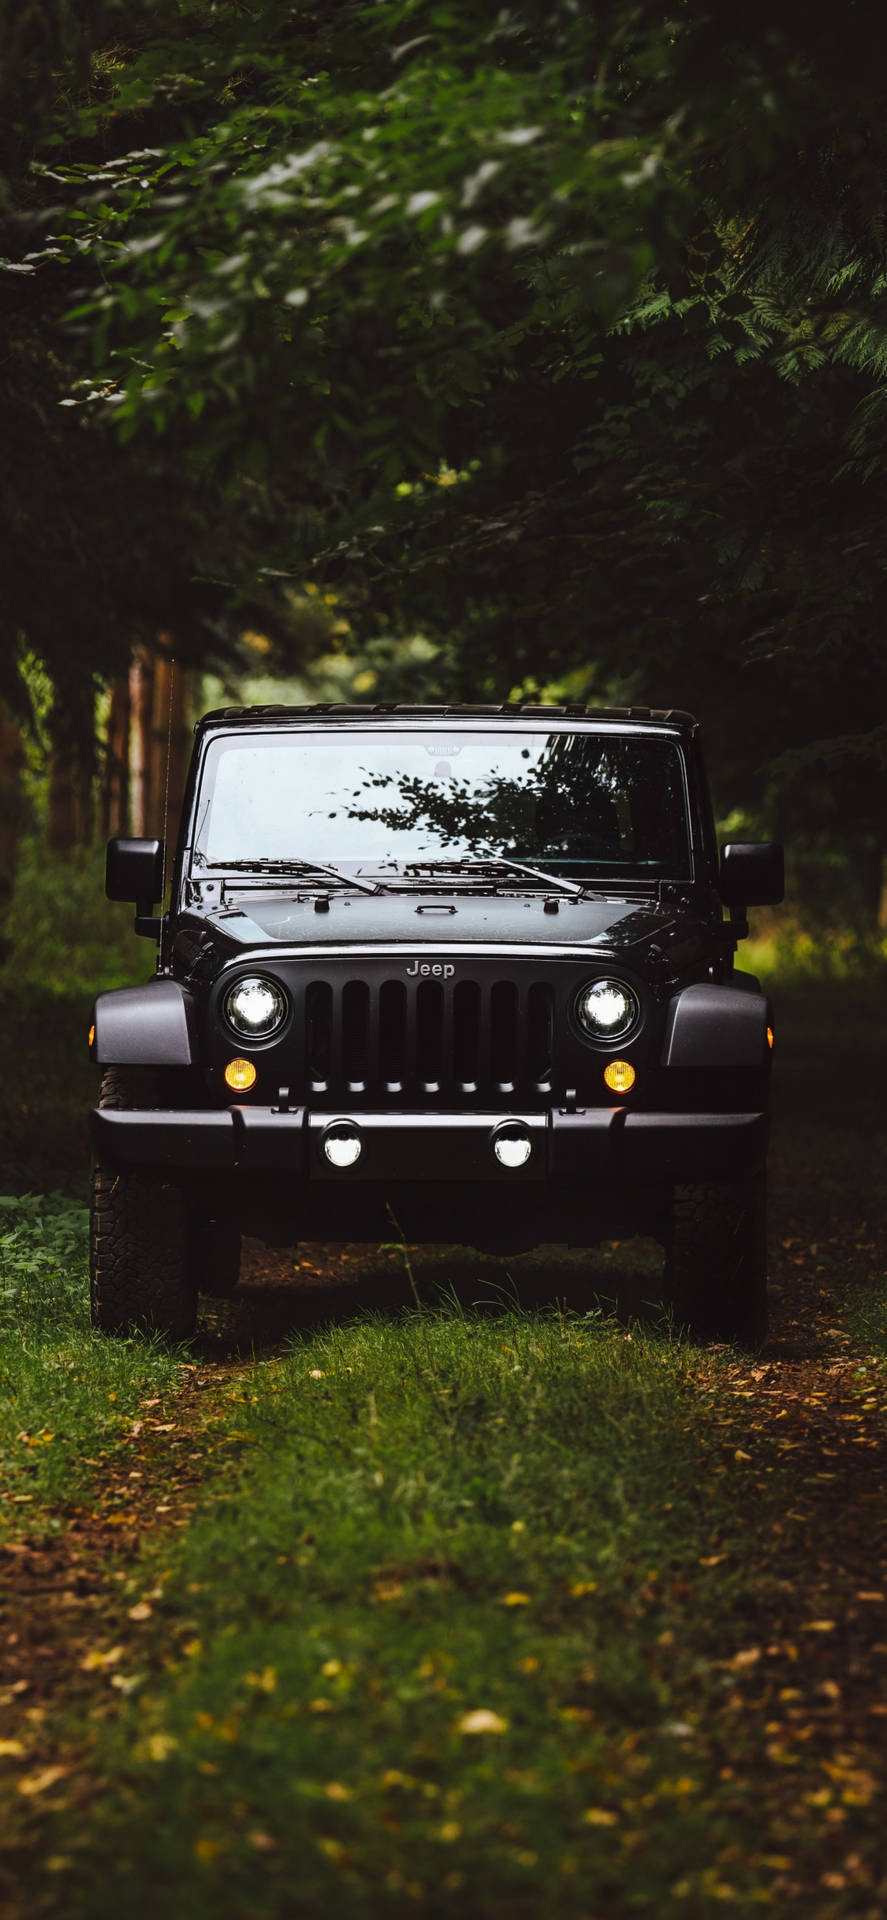 A Stunning Black Jeep Wrangler Venturing Through A Secluded Forest.